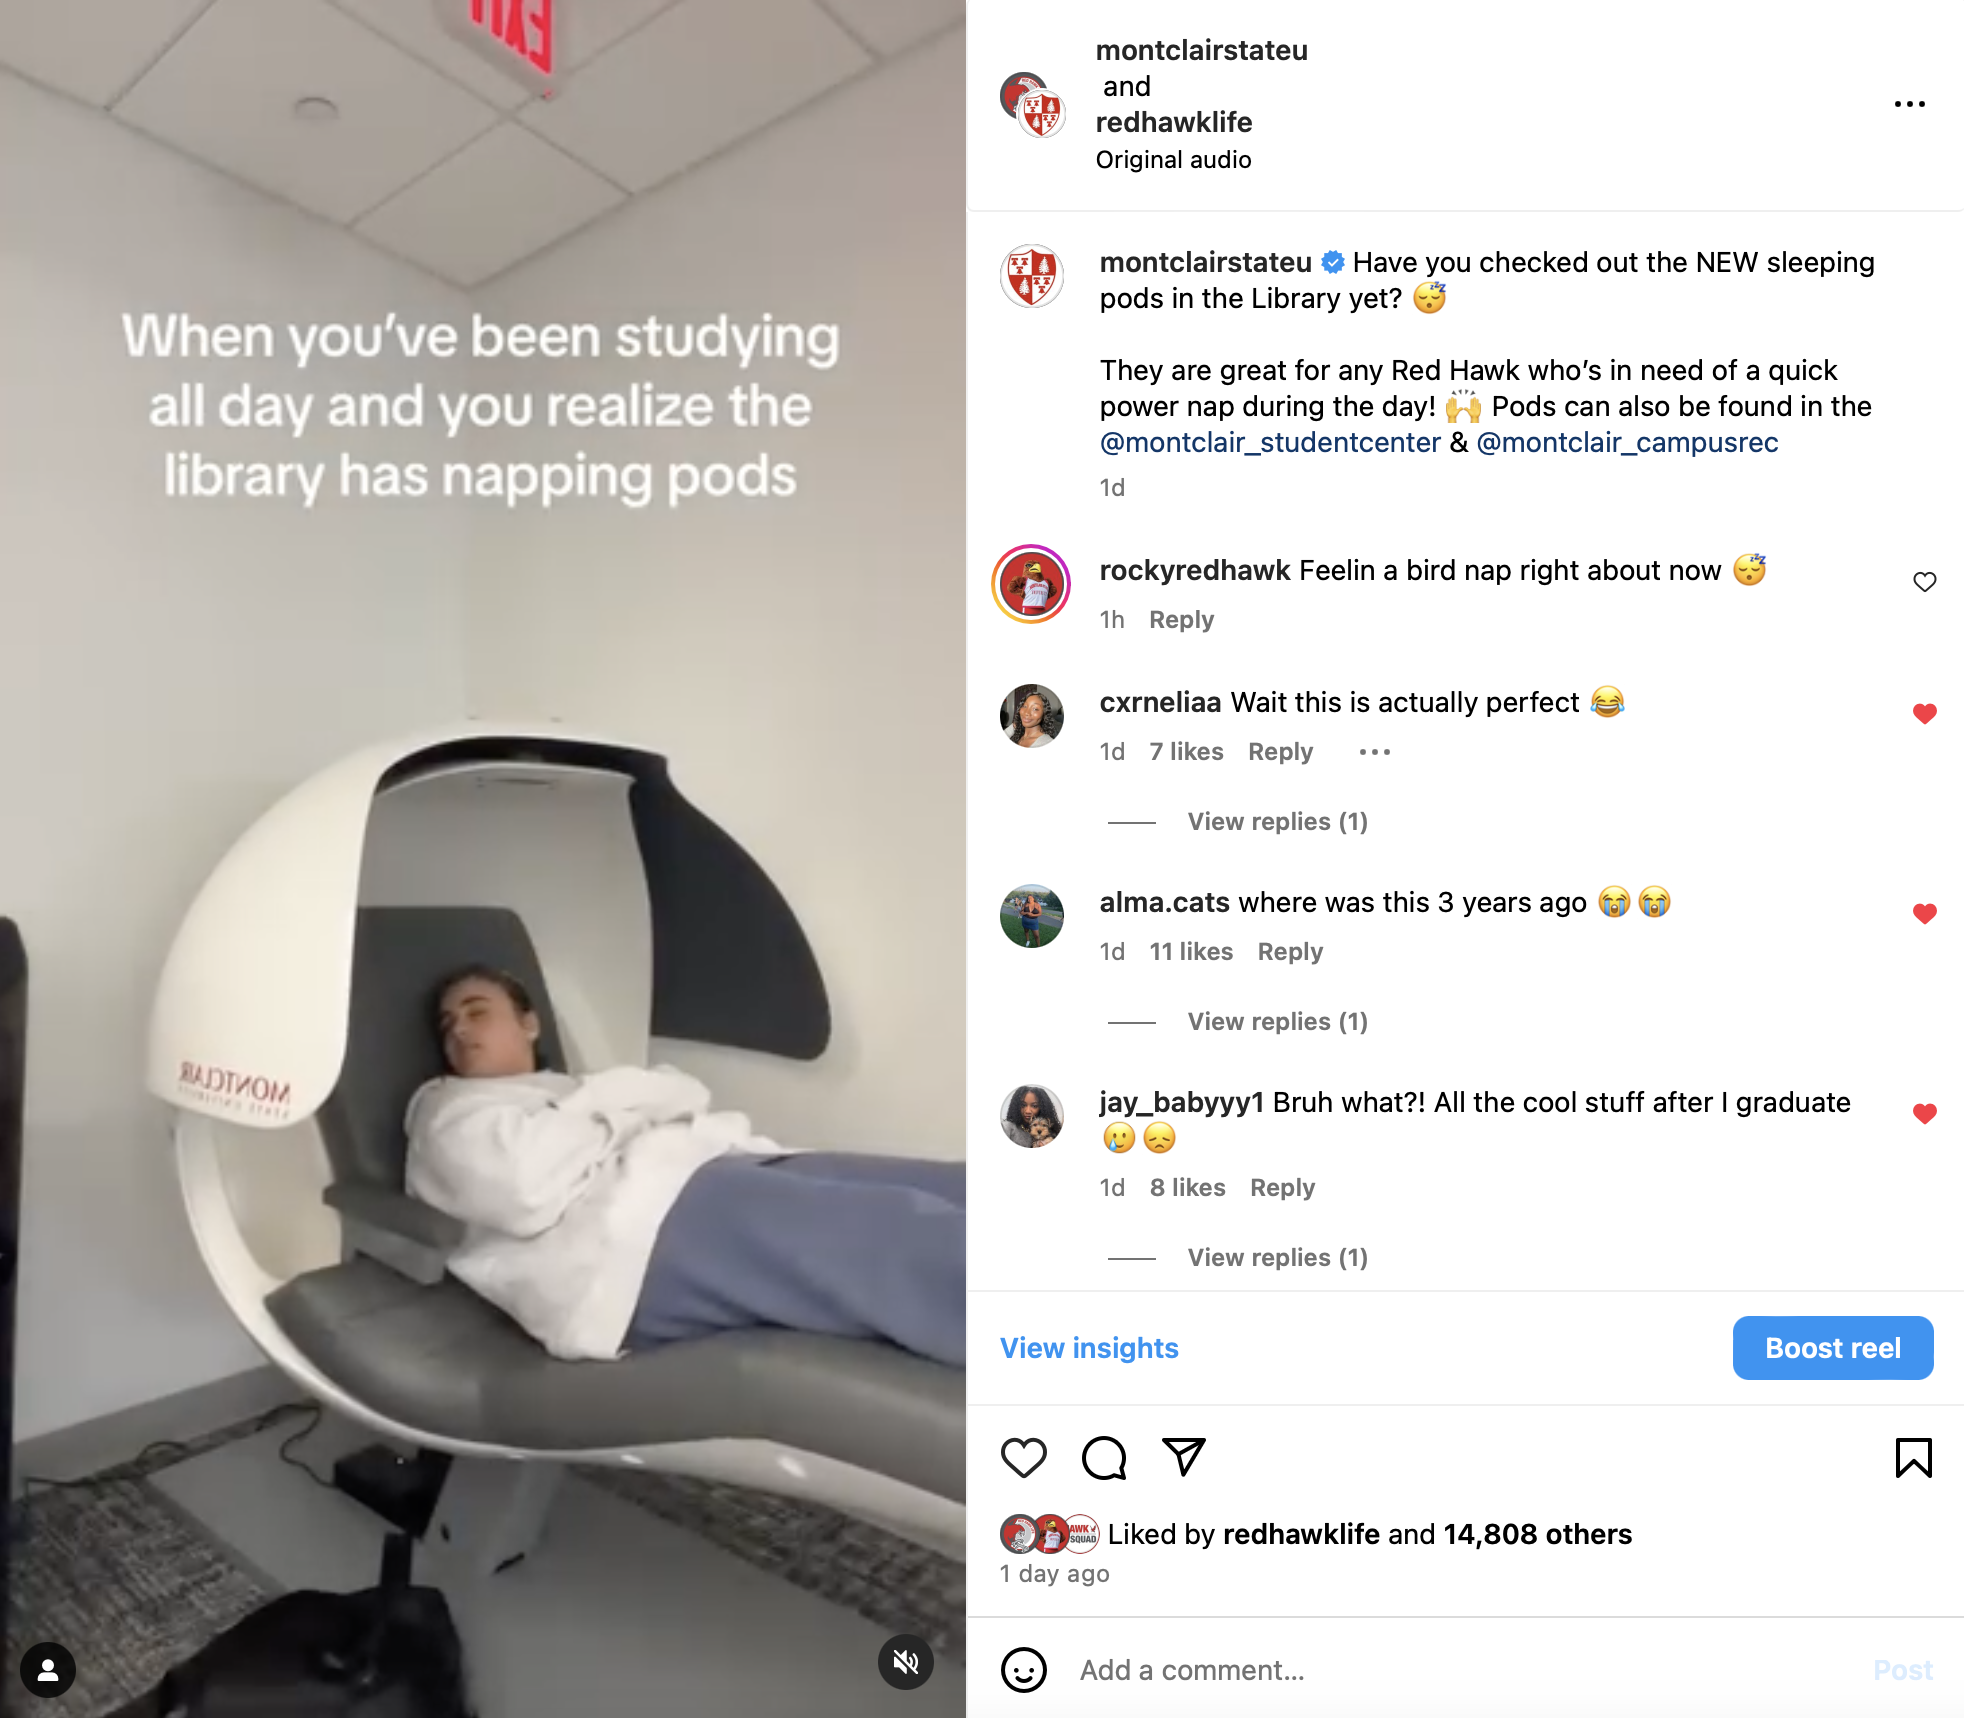 Have you checked out the NEW sleeping pods in the Library yet? They are great for any Red Hawk who’s in need of a quick power nap during the day! Pods can also be found in the @montclair_studentcenter & @montclair_campusrec